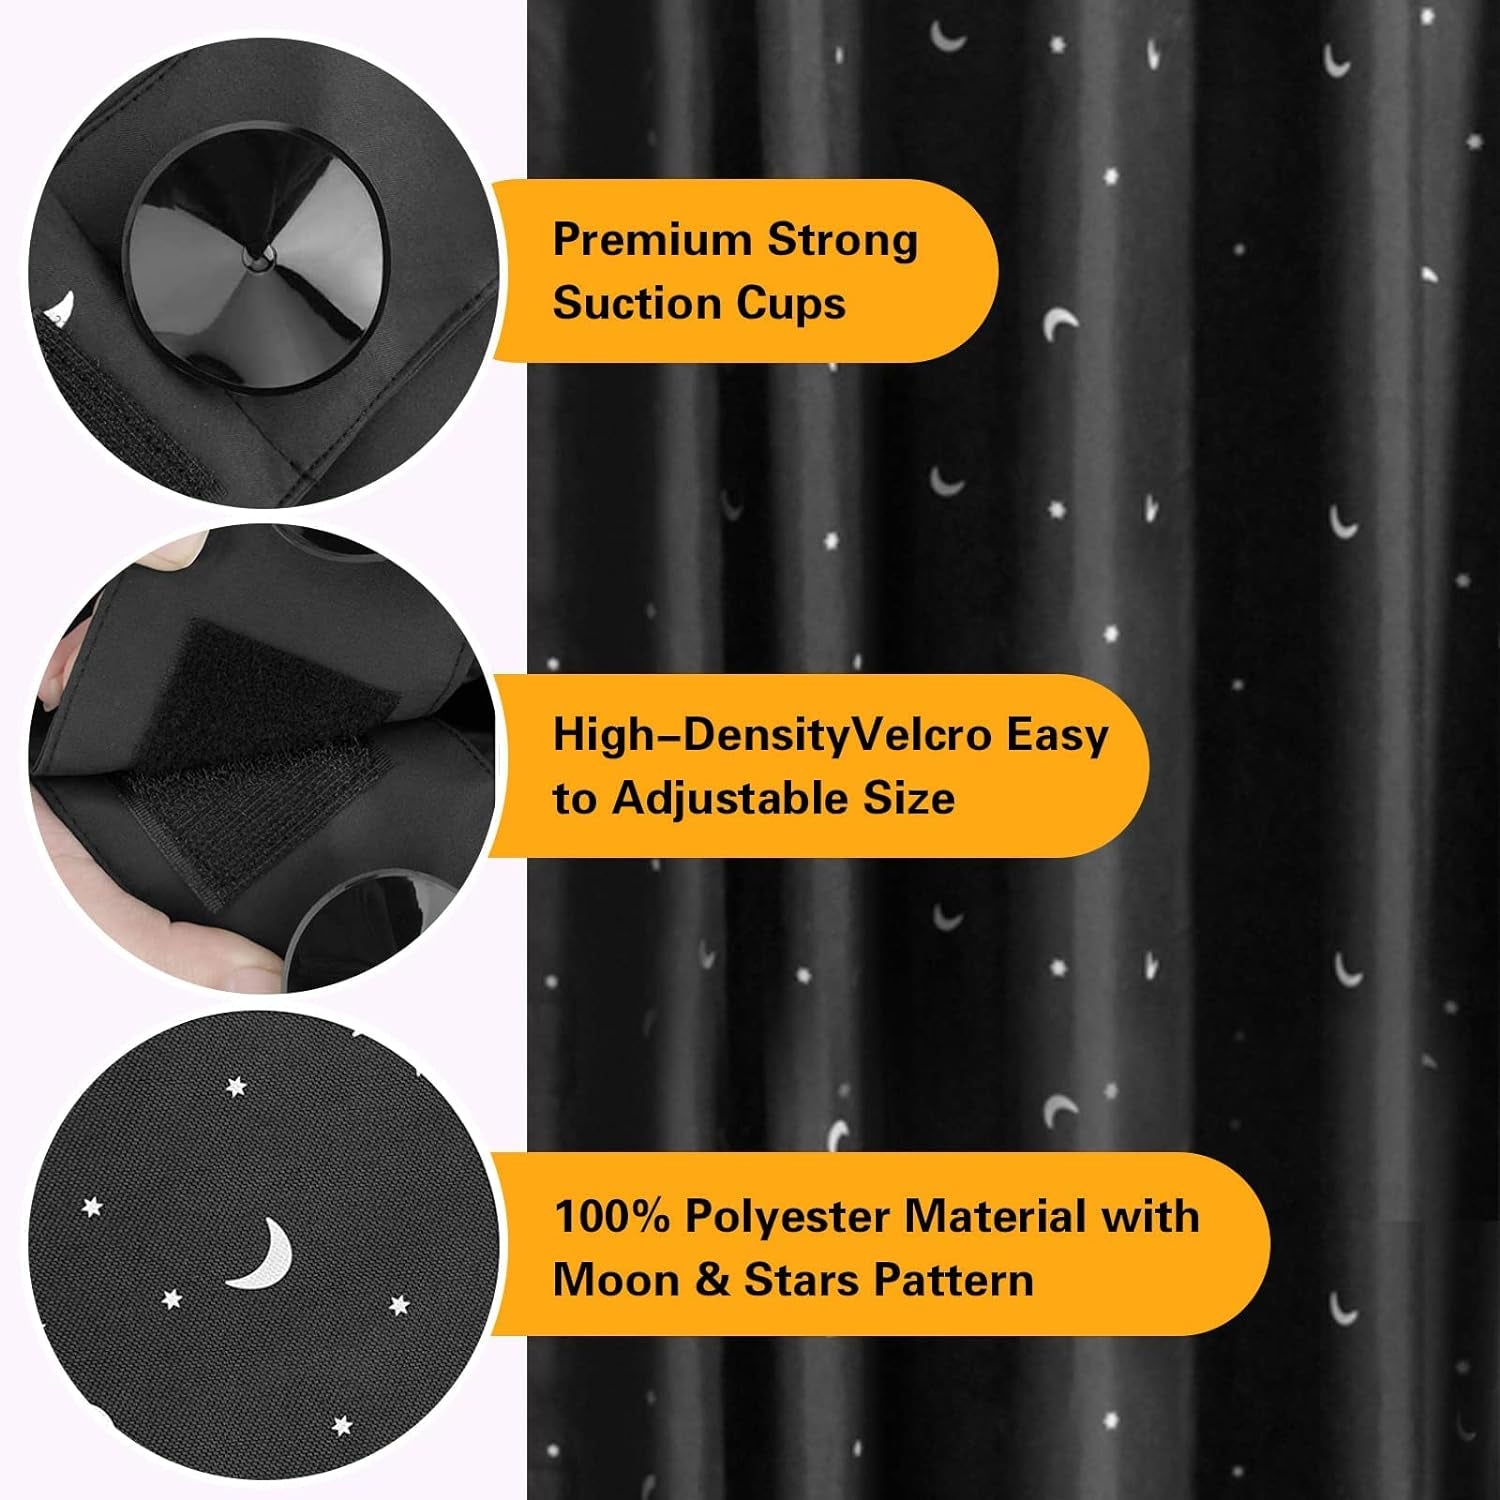 2-Pack Portable Blackout Curtains, Windows Glass Suction Cups Blackout Shades for Nursery Room, Max Extend 50" X 78", Baby/Kids Travel Use - Moon & Stars Pattern  venrey GB   